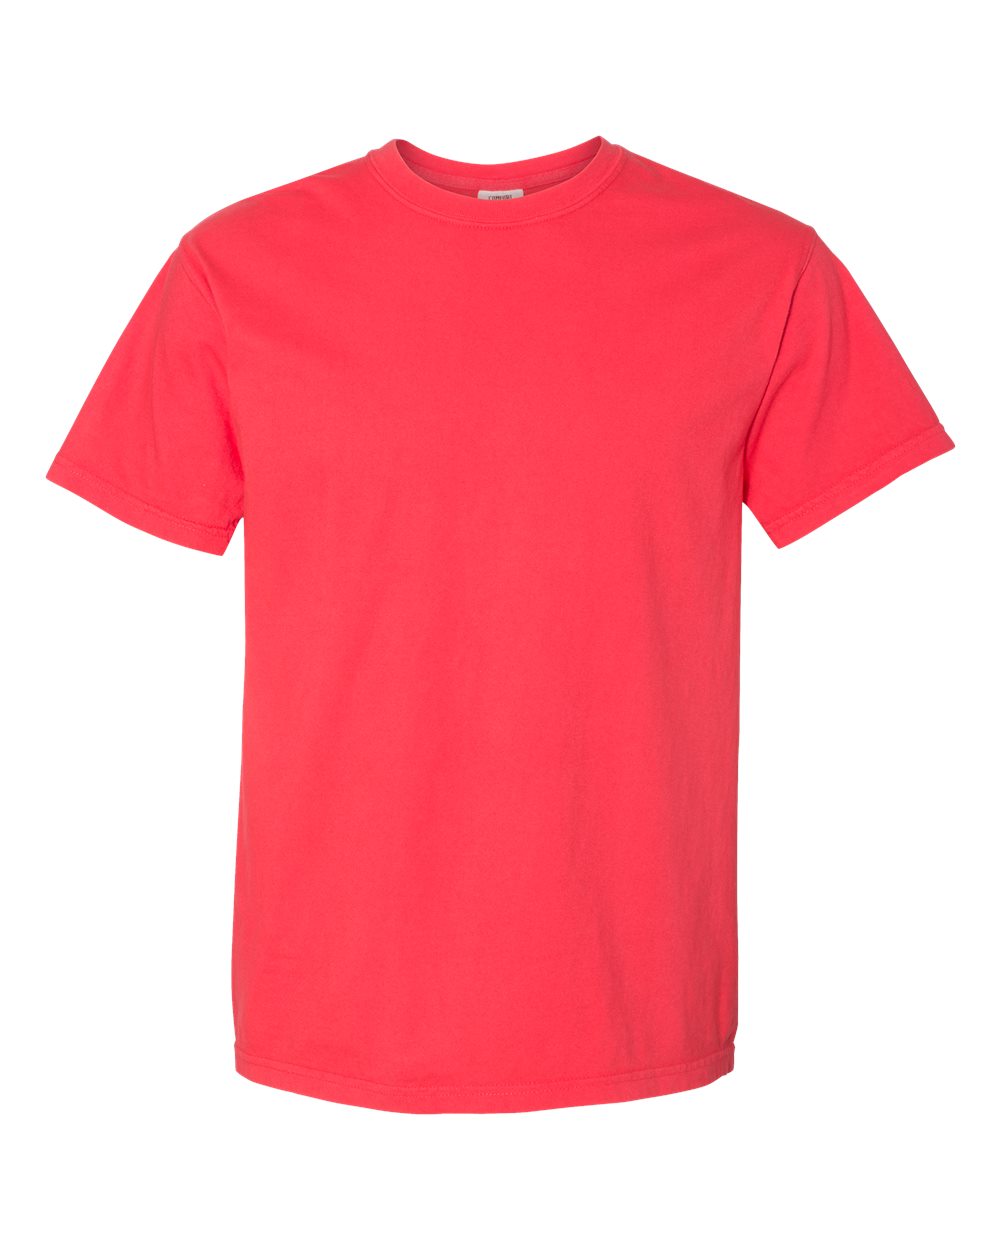 Comfort Colors Garment-Dyed Tee (1717) in Paprika